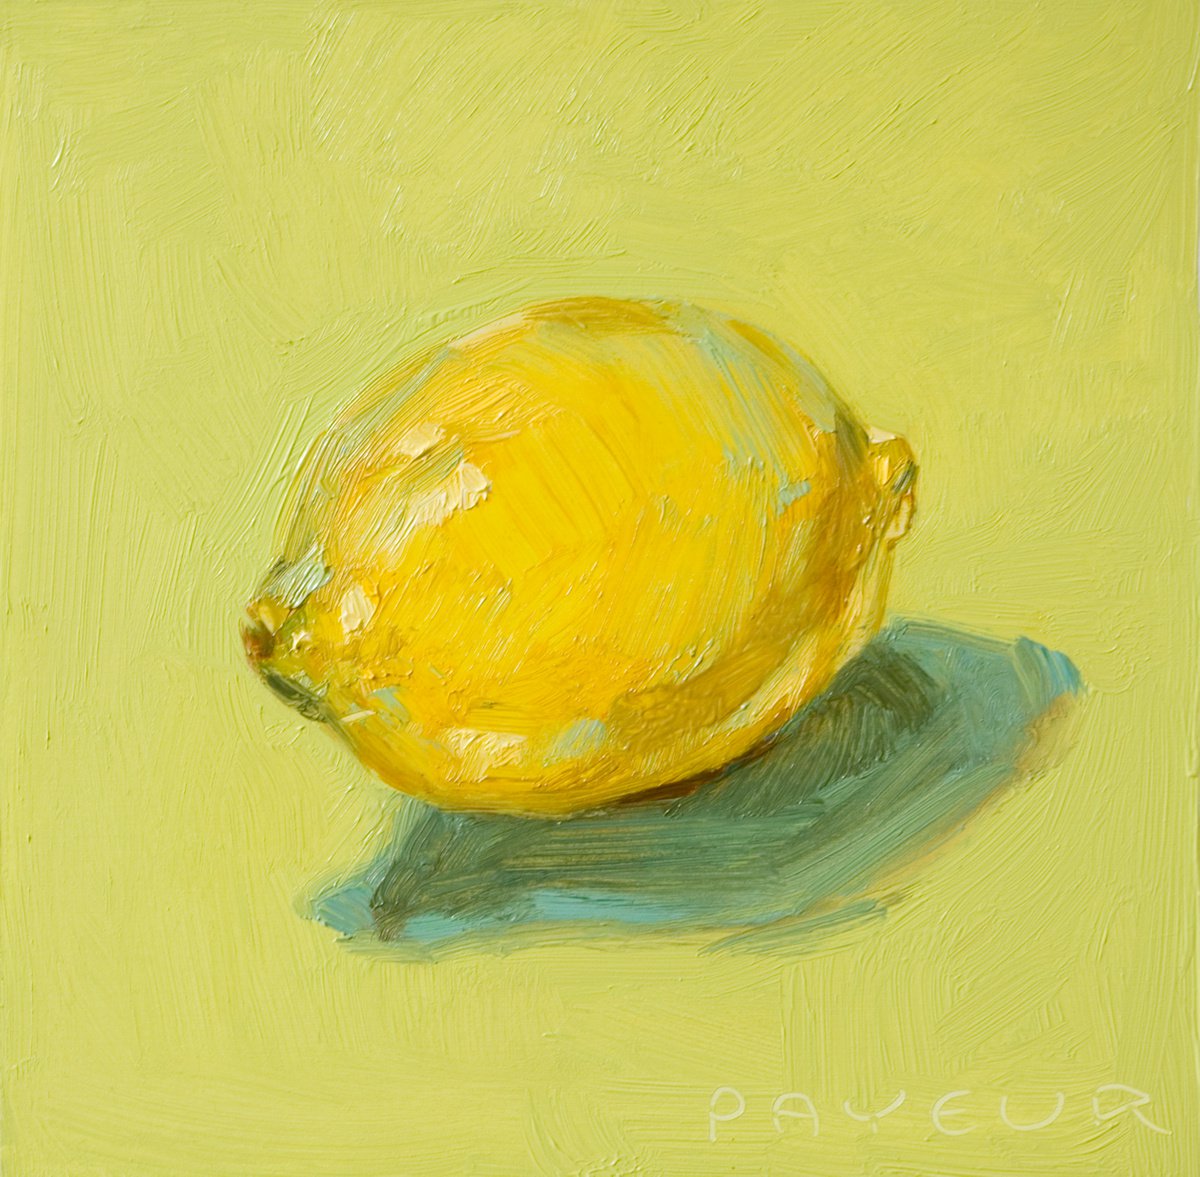 gift for food lovers: modern still life of yellow lemon on green by Olivier Payeur